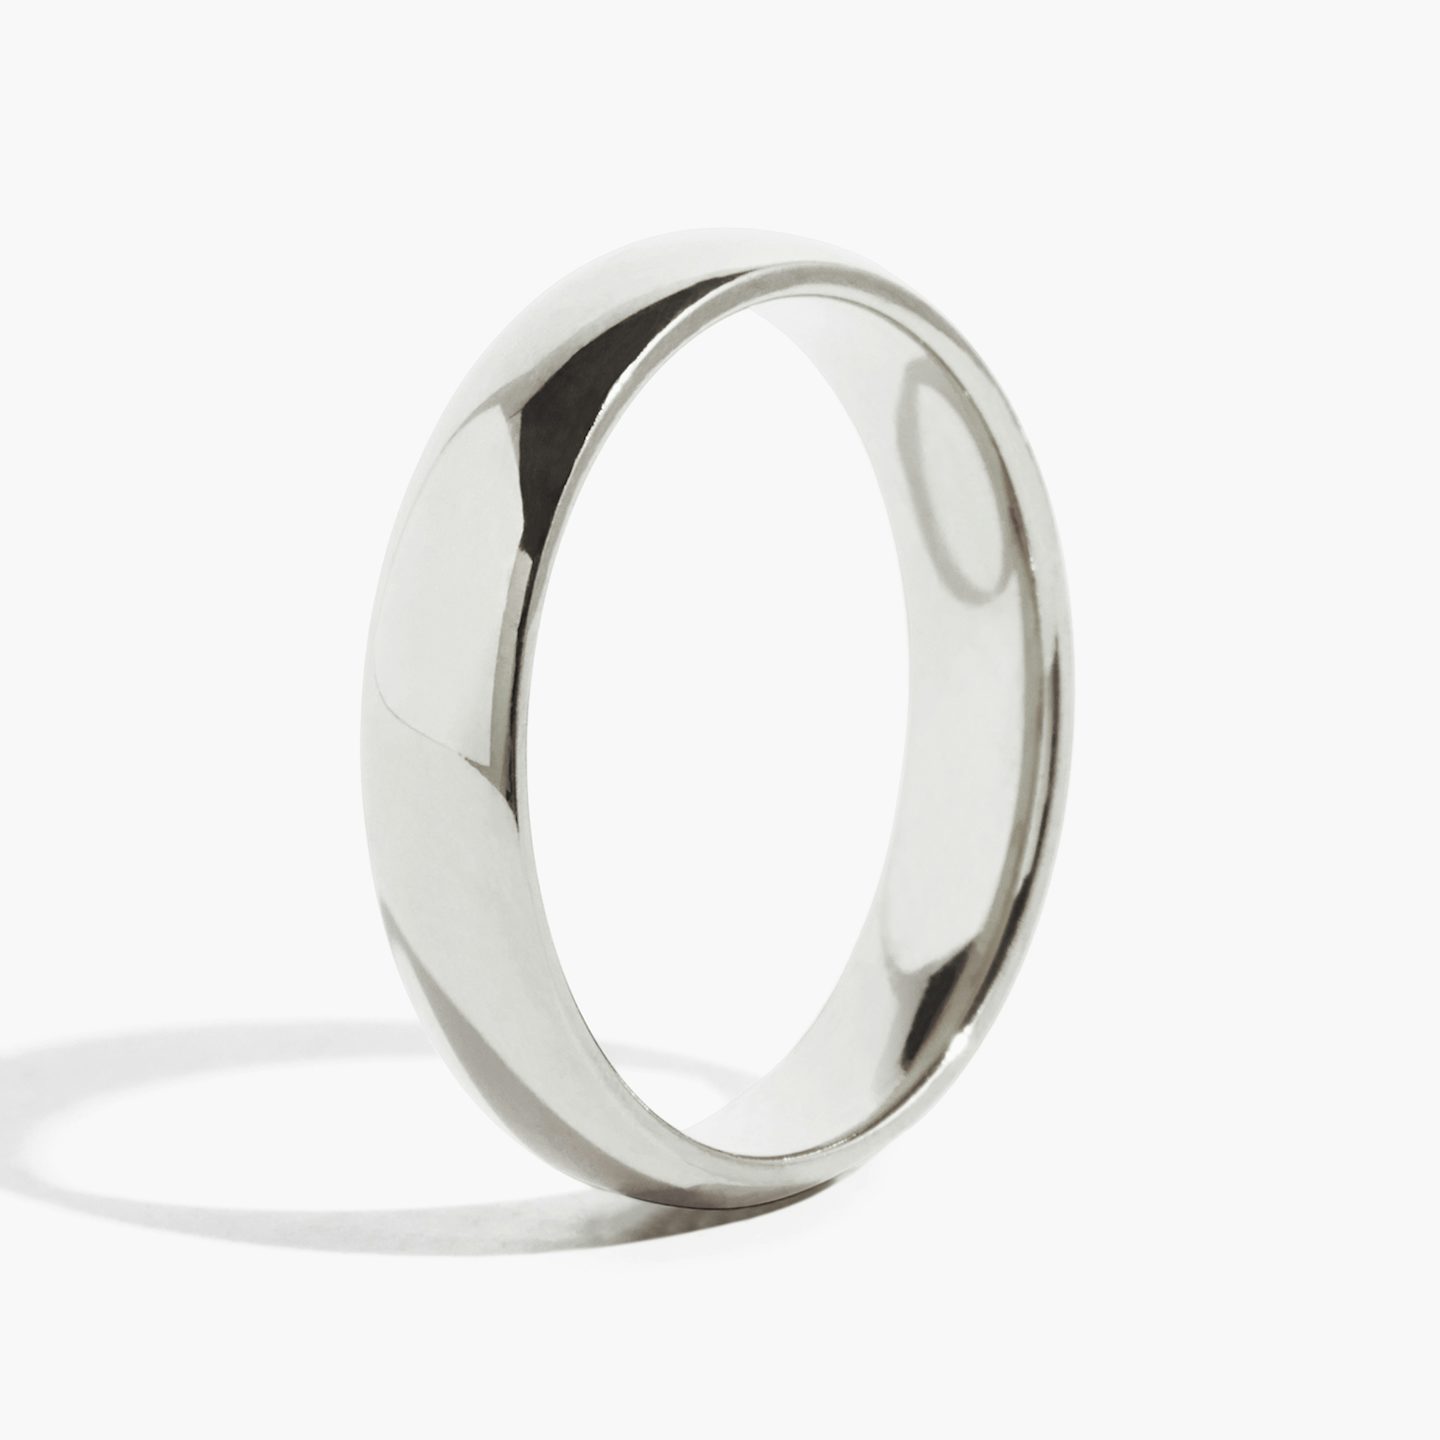 The Round | 18k | 18k White Gold | Band width: Large - 4.5mm